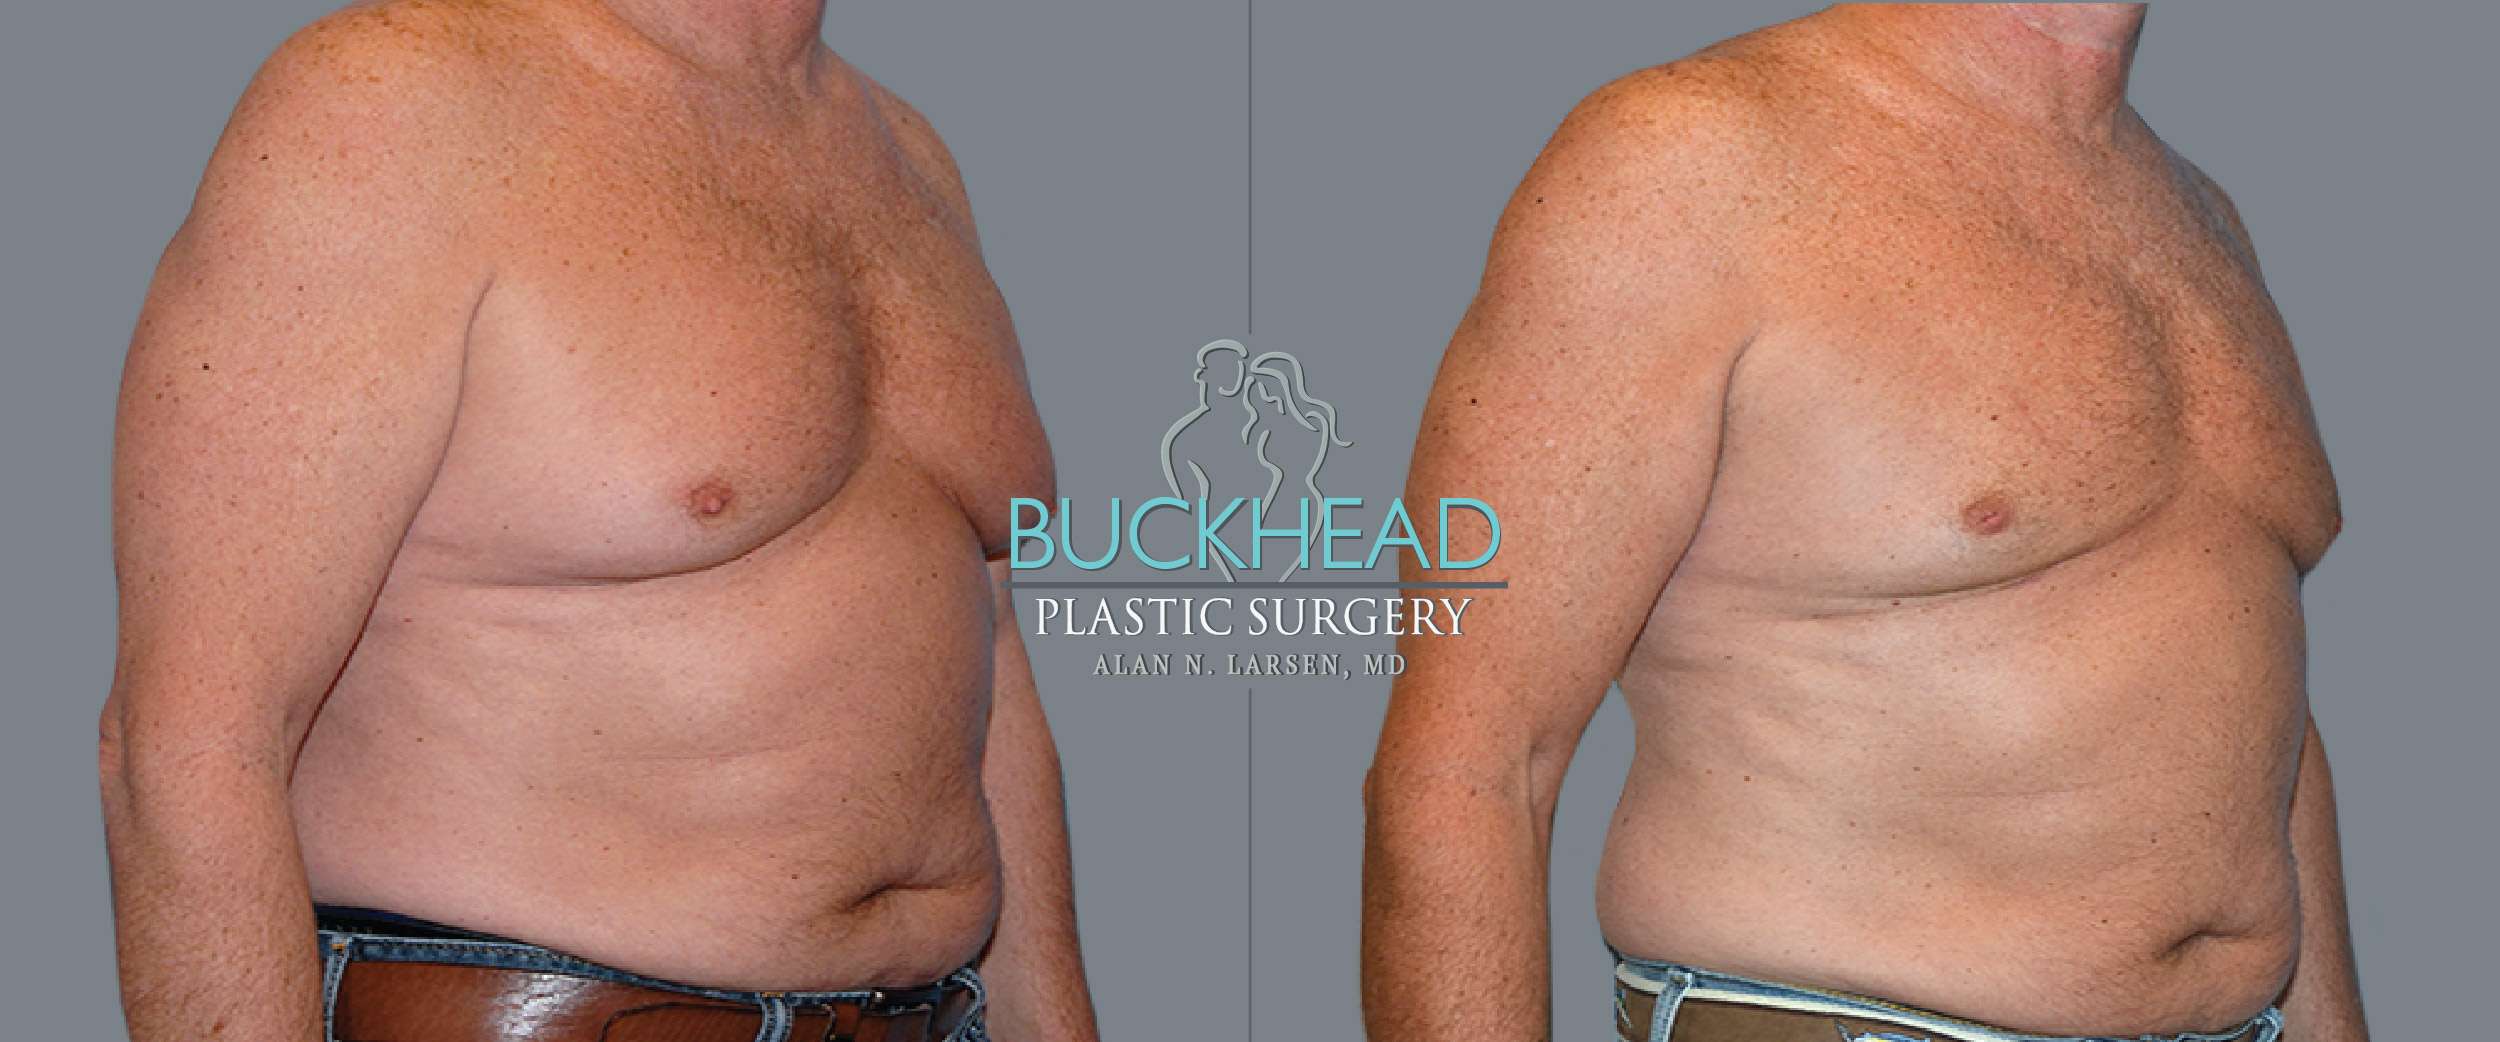 Before and After Photo Gallery | Gynecomastia - Male Breast Reduction & Correction | Buckhead Plastic Surgery | Double Board-Certified Plastic Surgeon in Atlanta GA